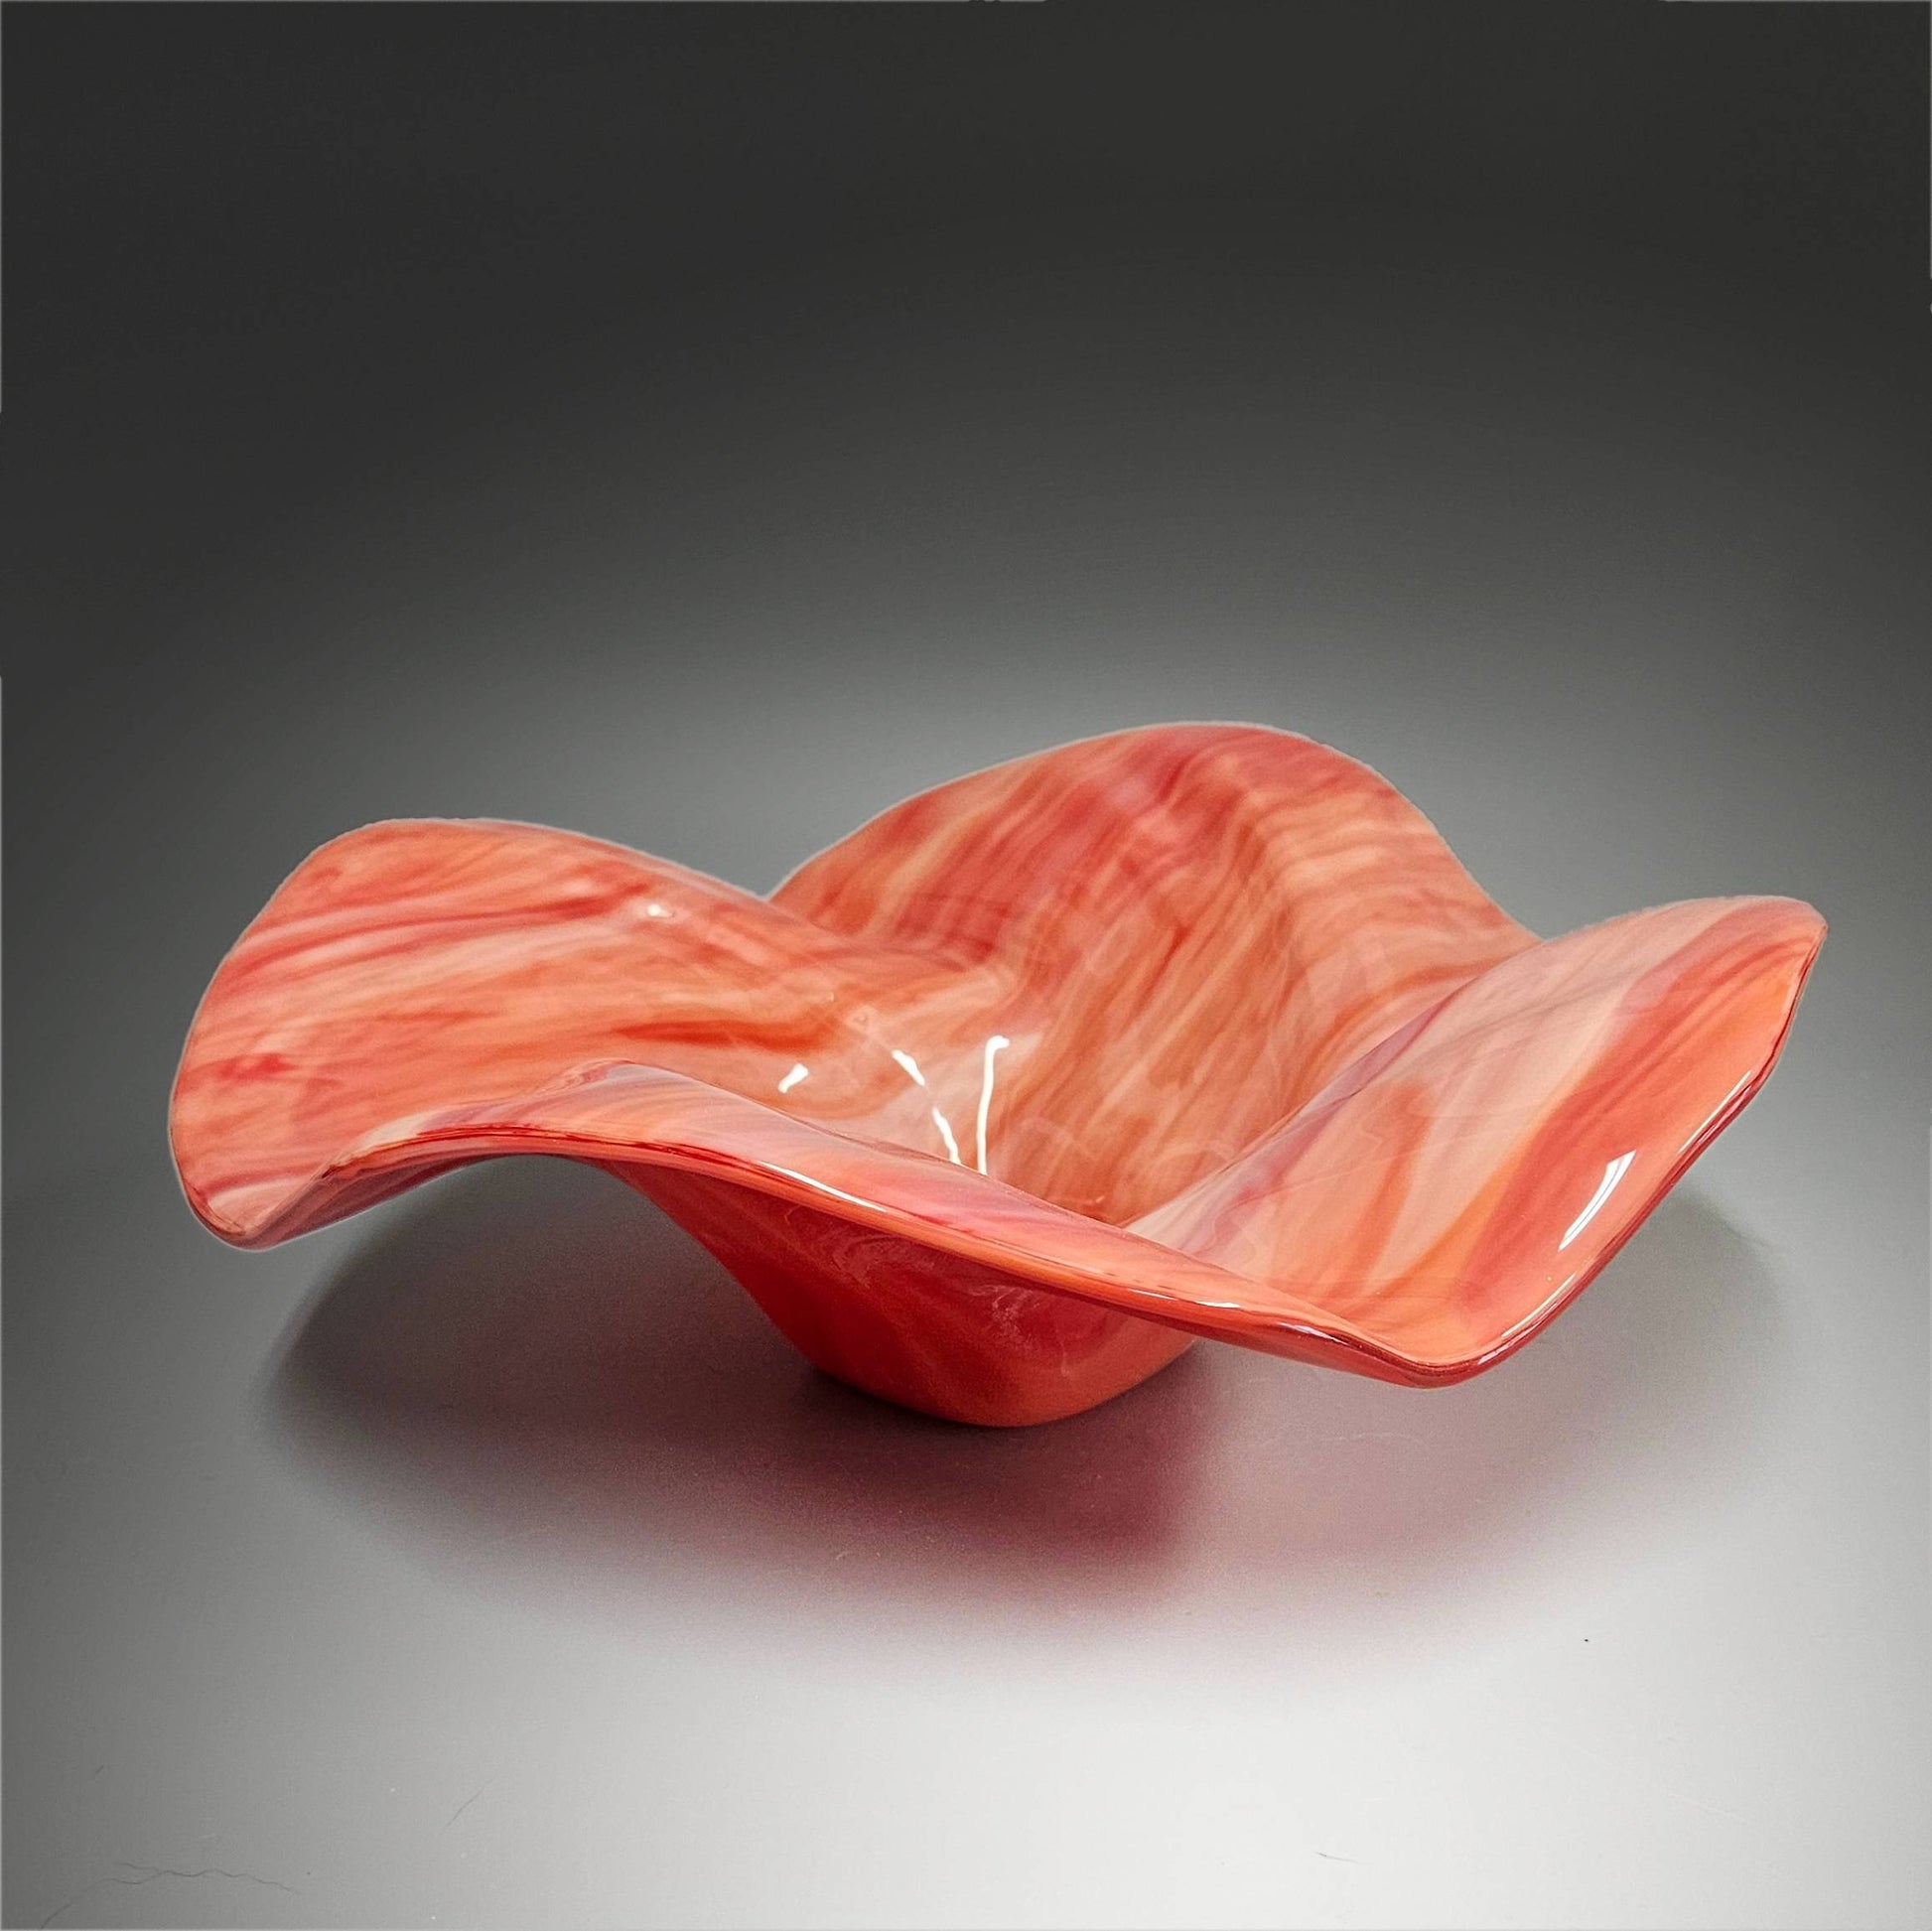 This mesmerizing glass art bowl captivates with its dynamic flow and vivid shades of reds and oranges. It’s a stunning conversation piece that seamlessly fits into any home décor. Whether displayed on a coffee table or side table, this bowl is sure to draw attention.